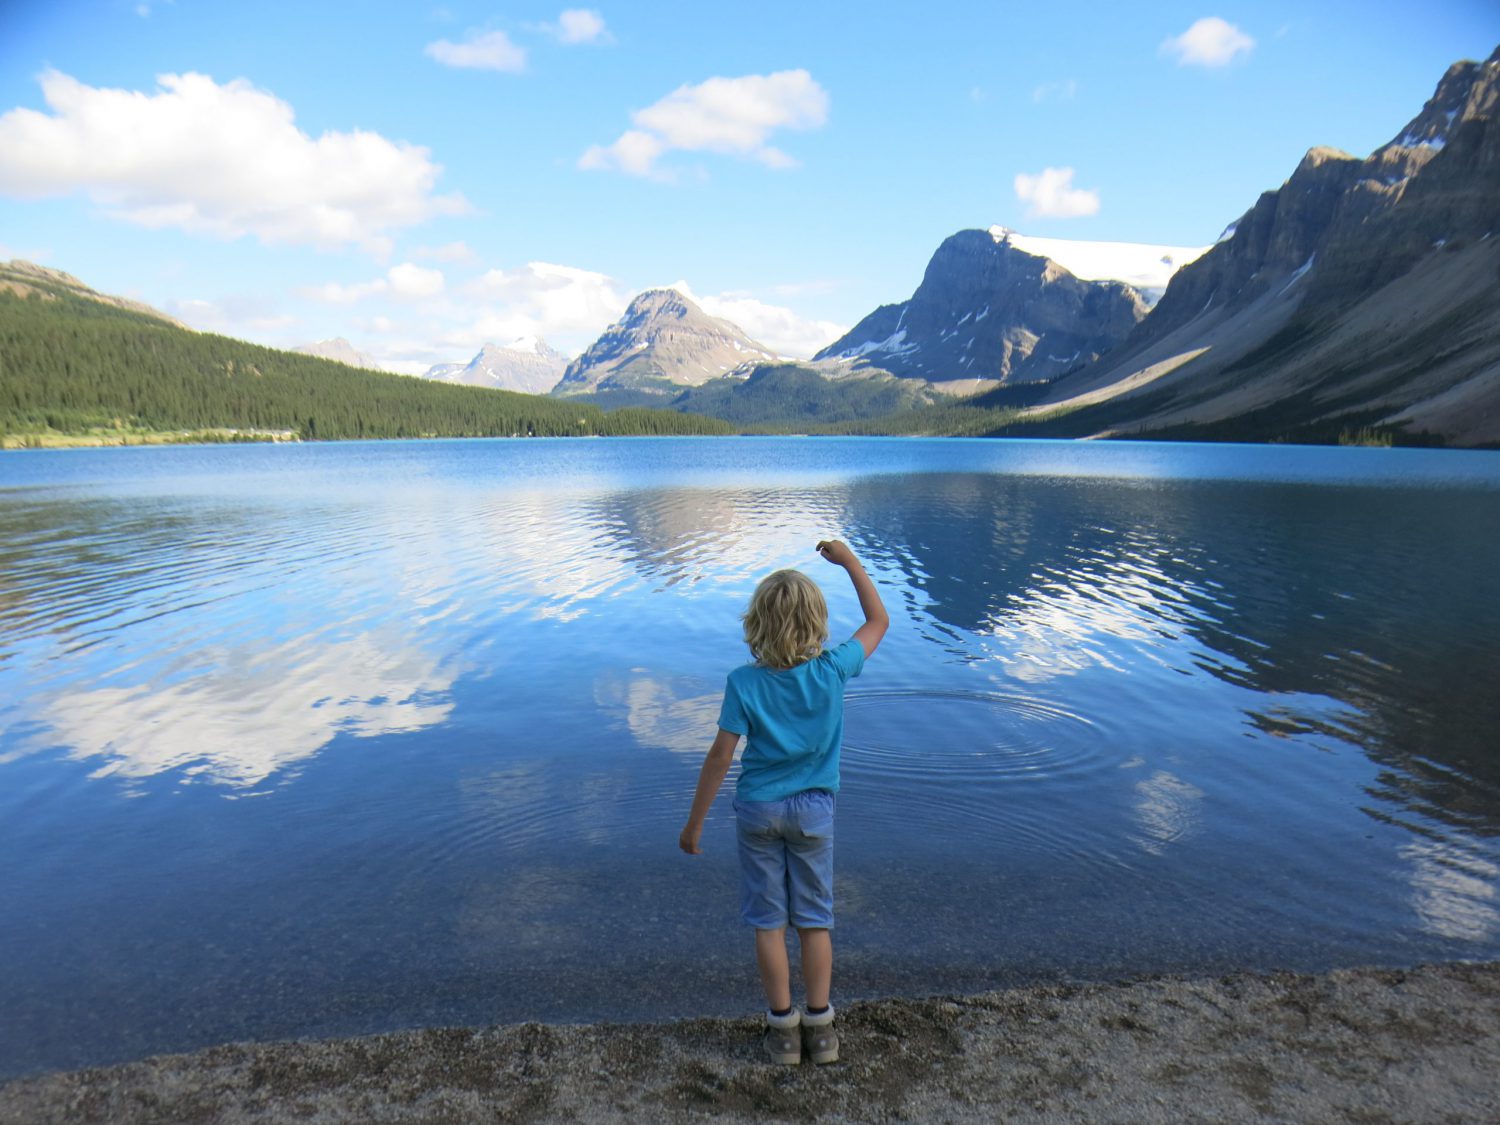 Boy throwing stones into lake, Canada pictures